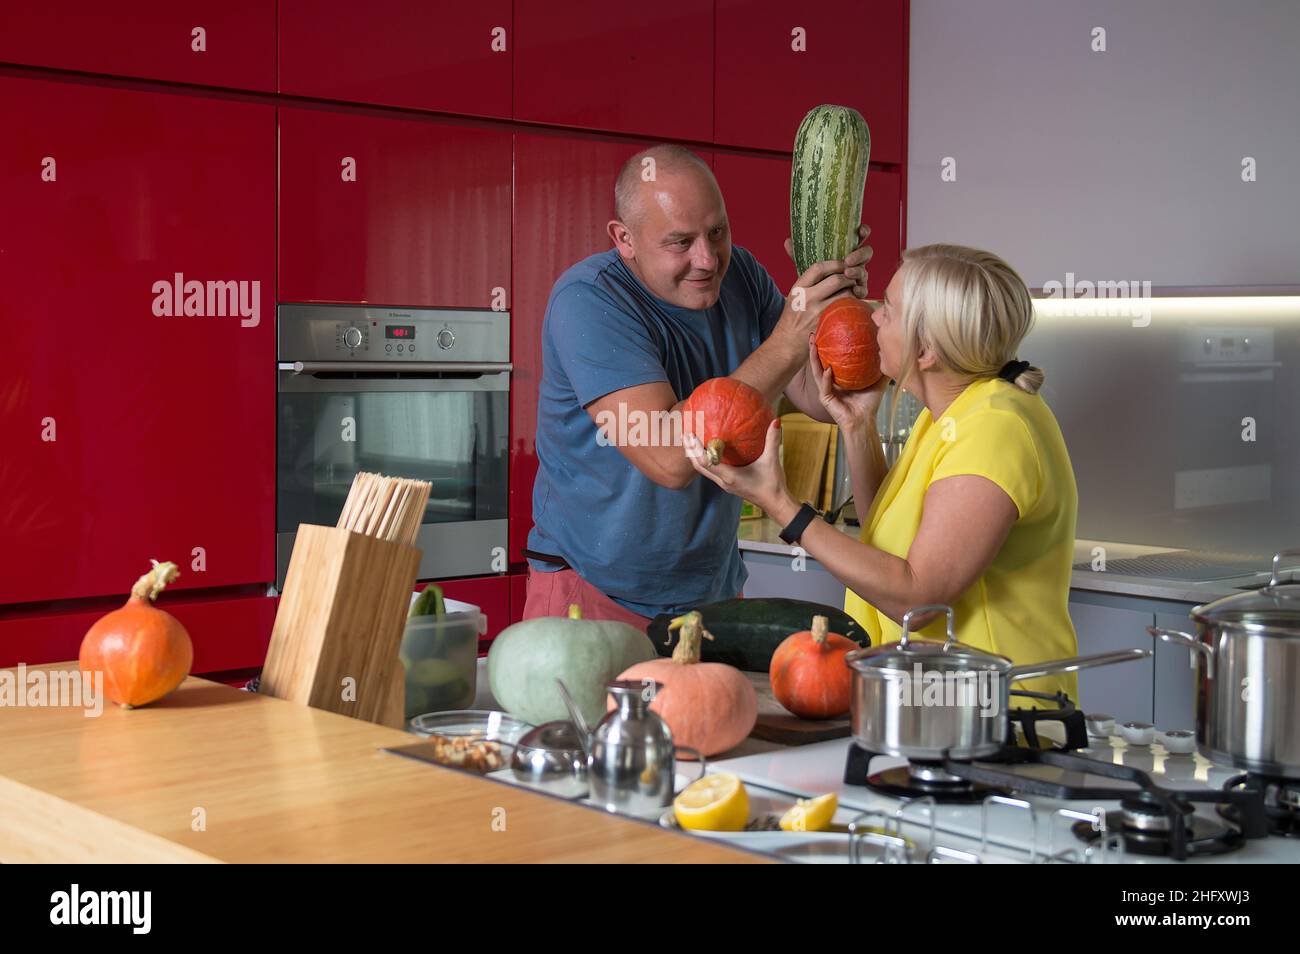 Family fun. Happy wife and husband having fun and joking in the kitchen while making dinner Stock Photo